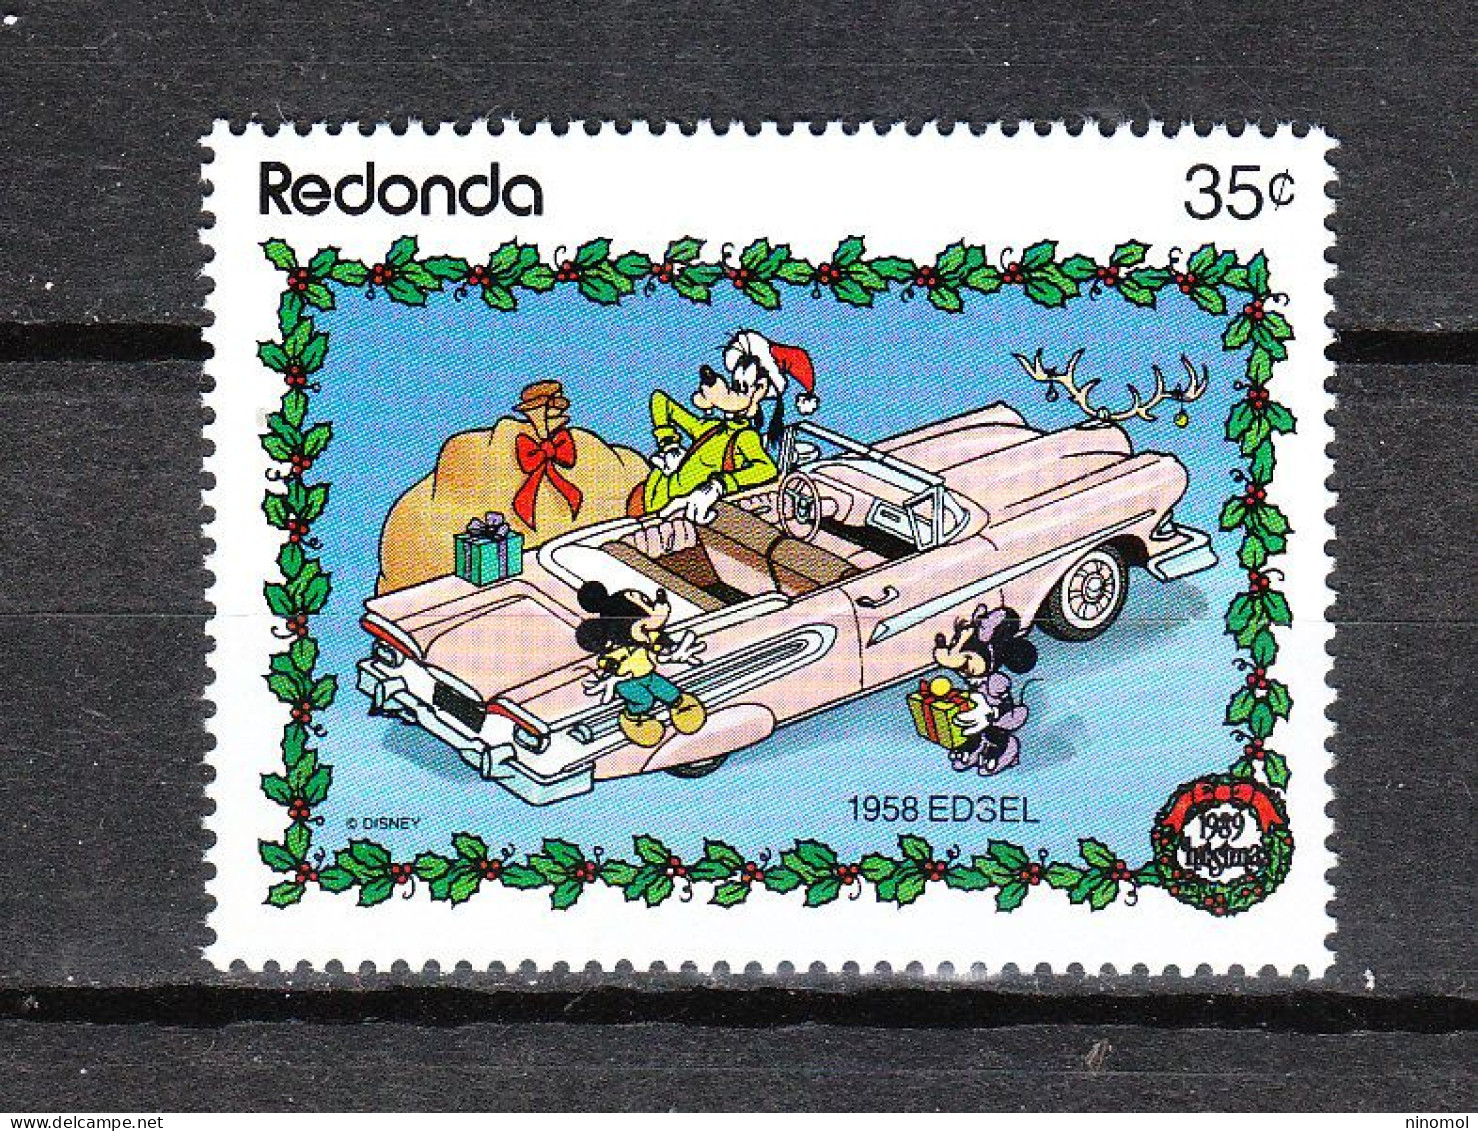 Redonda  - 1988. Pippo Babbo Natale In Auto Edsel Ford. Goofy Santa Claus In A Ford Edsel Car. MNH - Disney